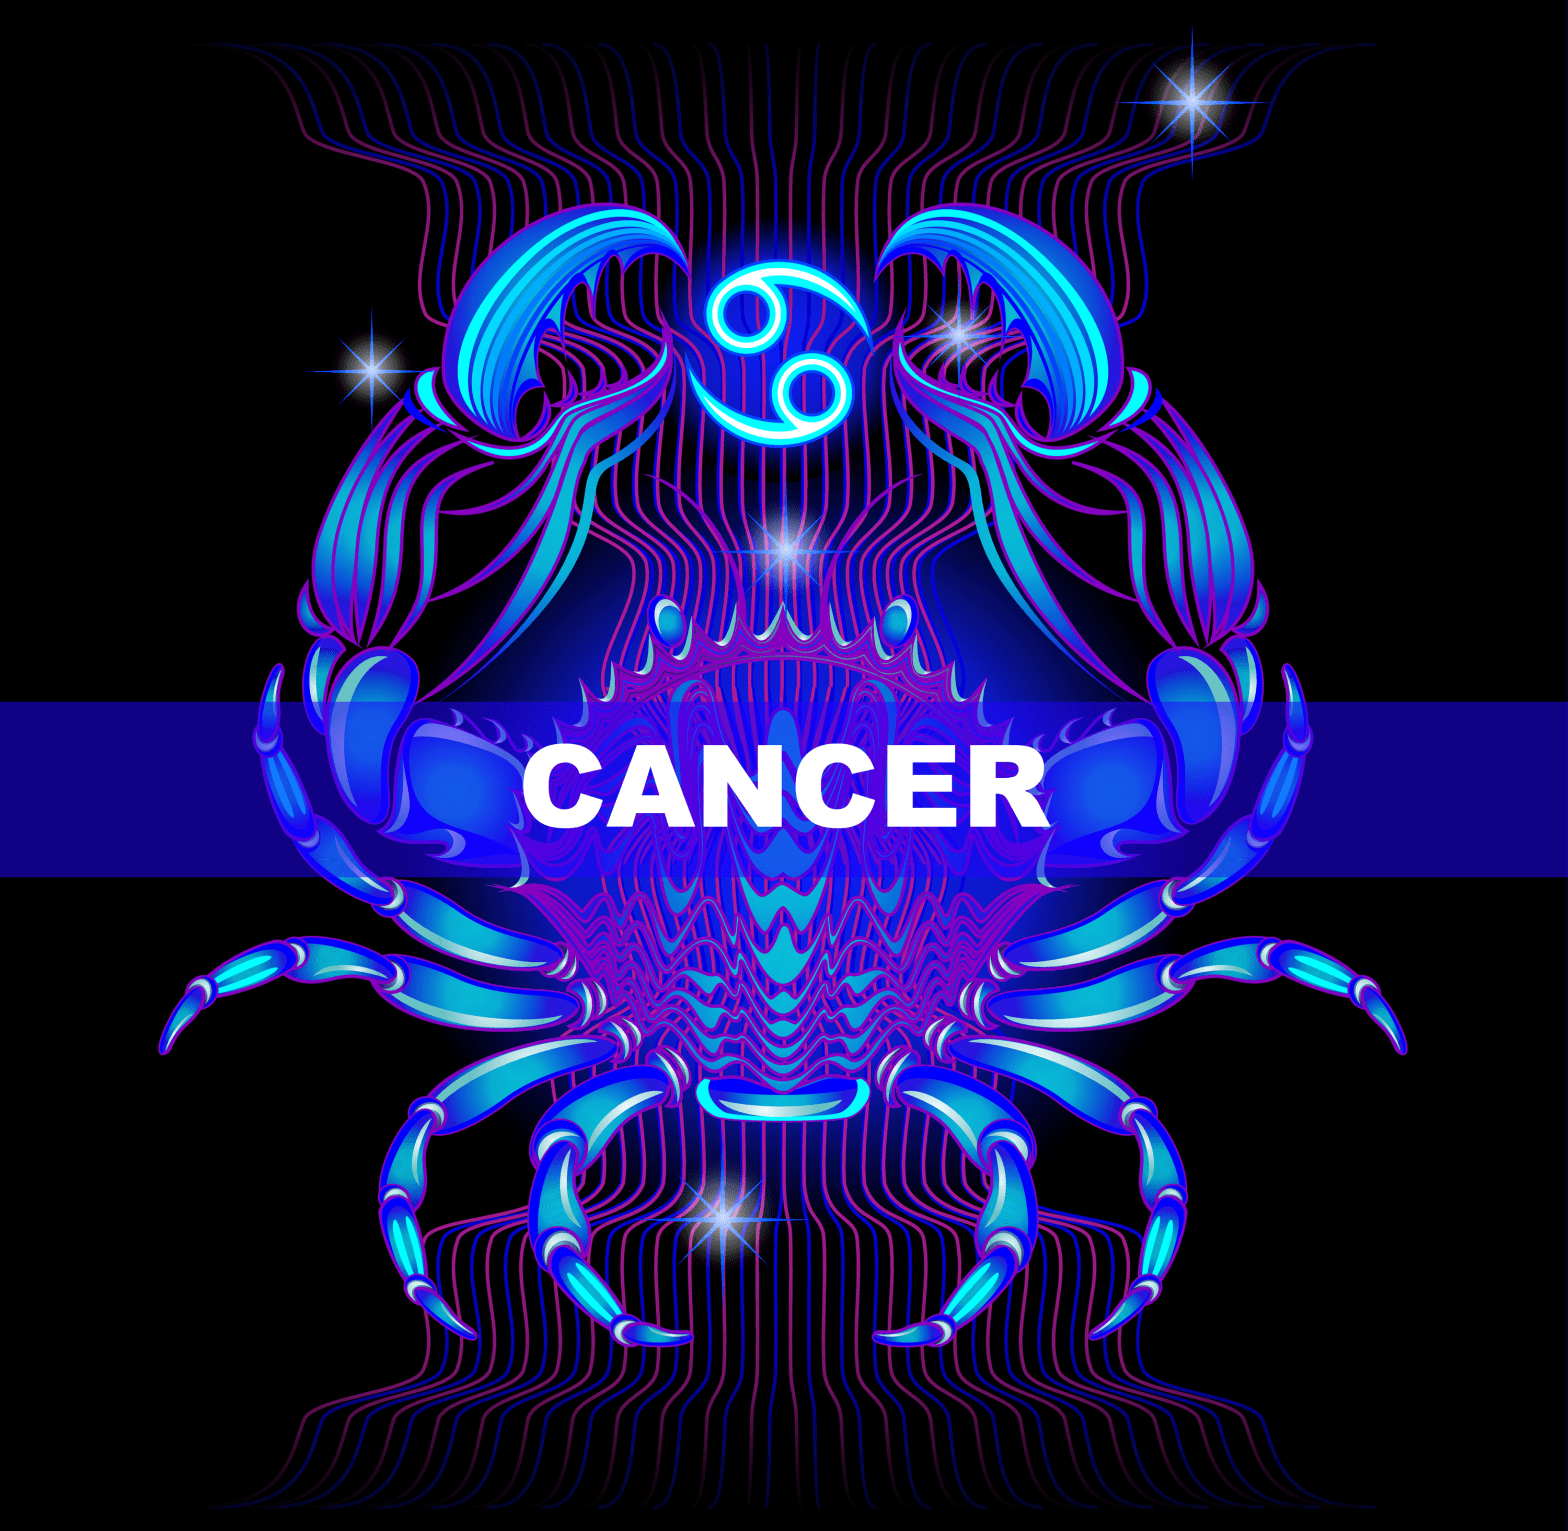 astrological horoscope for cancer 2020 21 mid year review next 12 months